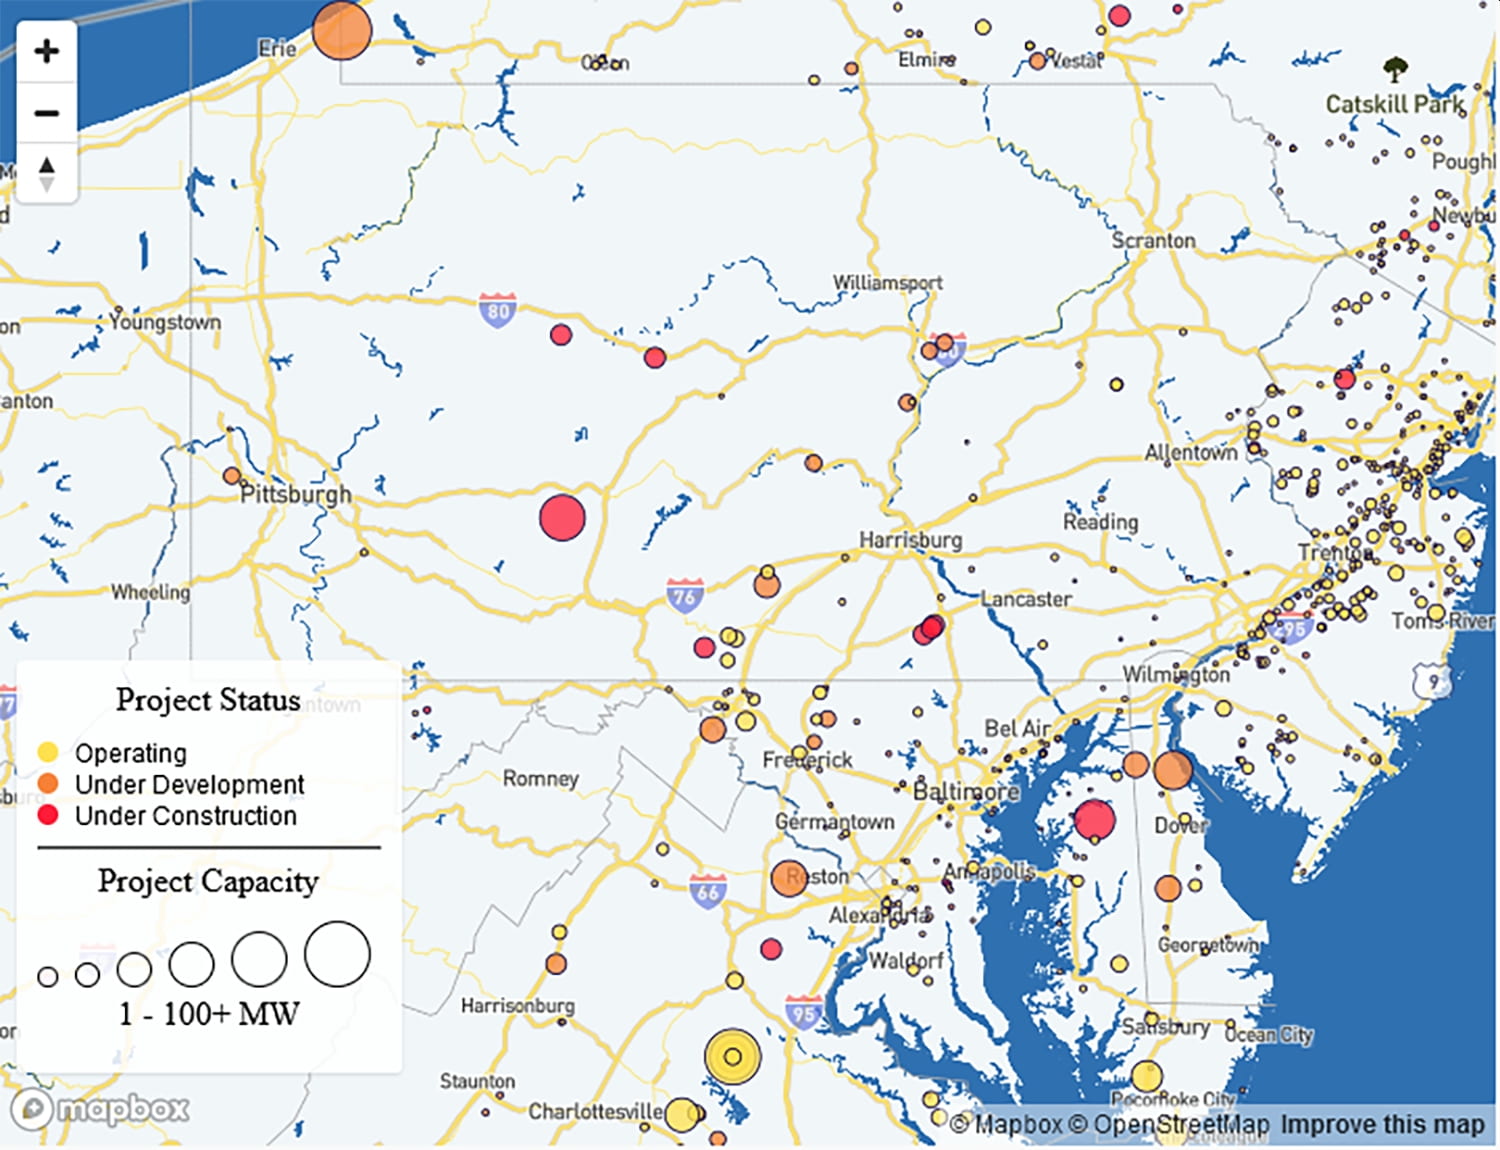 Large-capacity solar projects operating, under development, or under construction in Pennsylvania and the Mid-Atlantic, May 2022. Credit: Solar Energy Industries Association, https://www.seia.org/research-resources/major-solar-projects-list